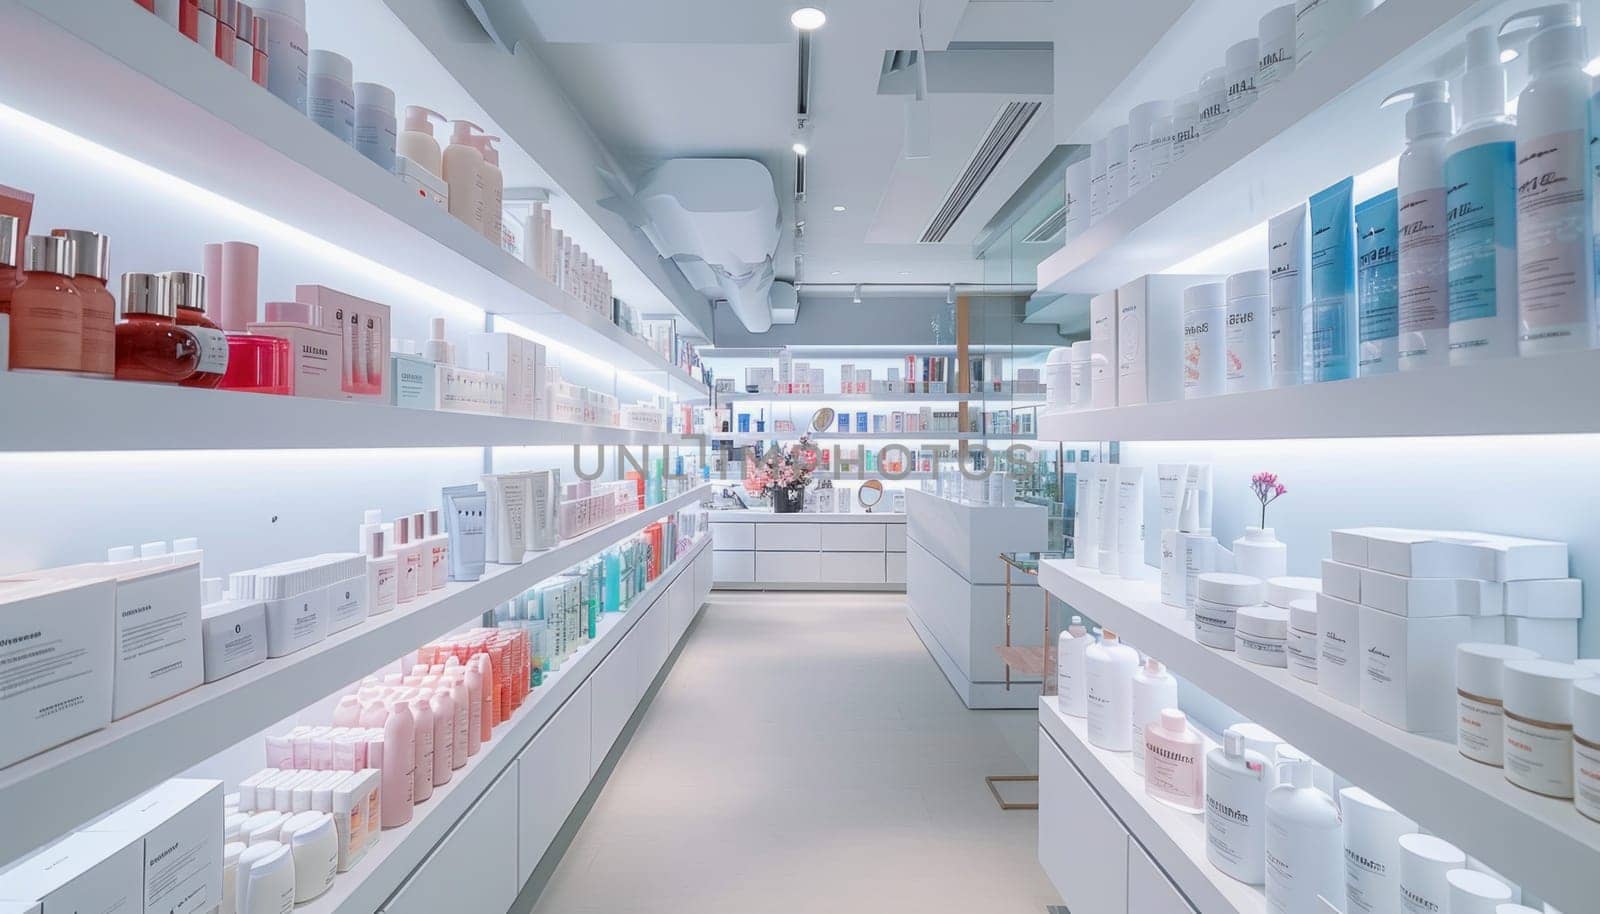 The image displays a variety of products on shelves in the pharmacy aisle, resulting in a blurred effect